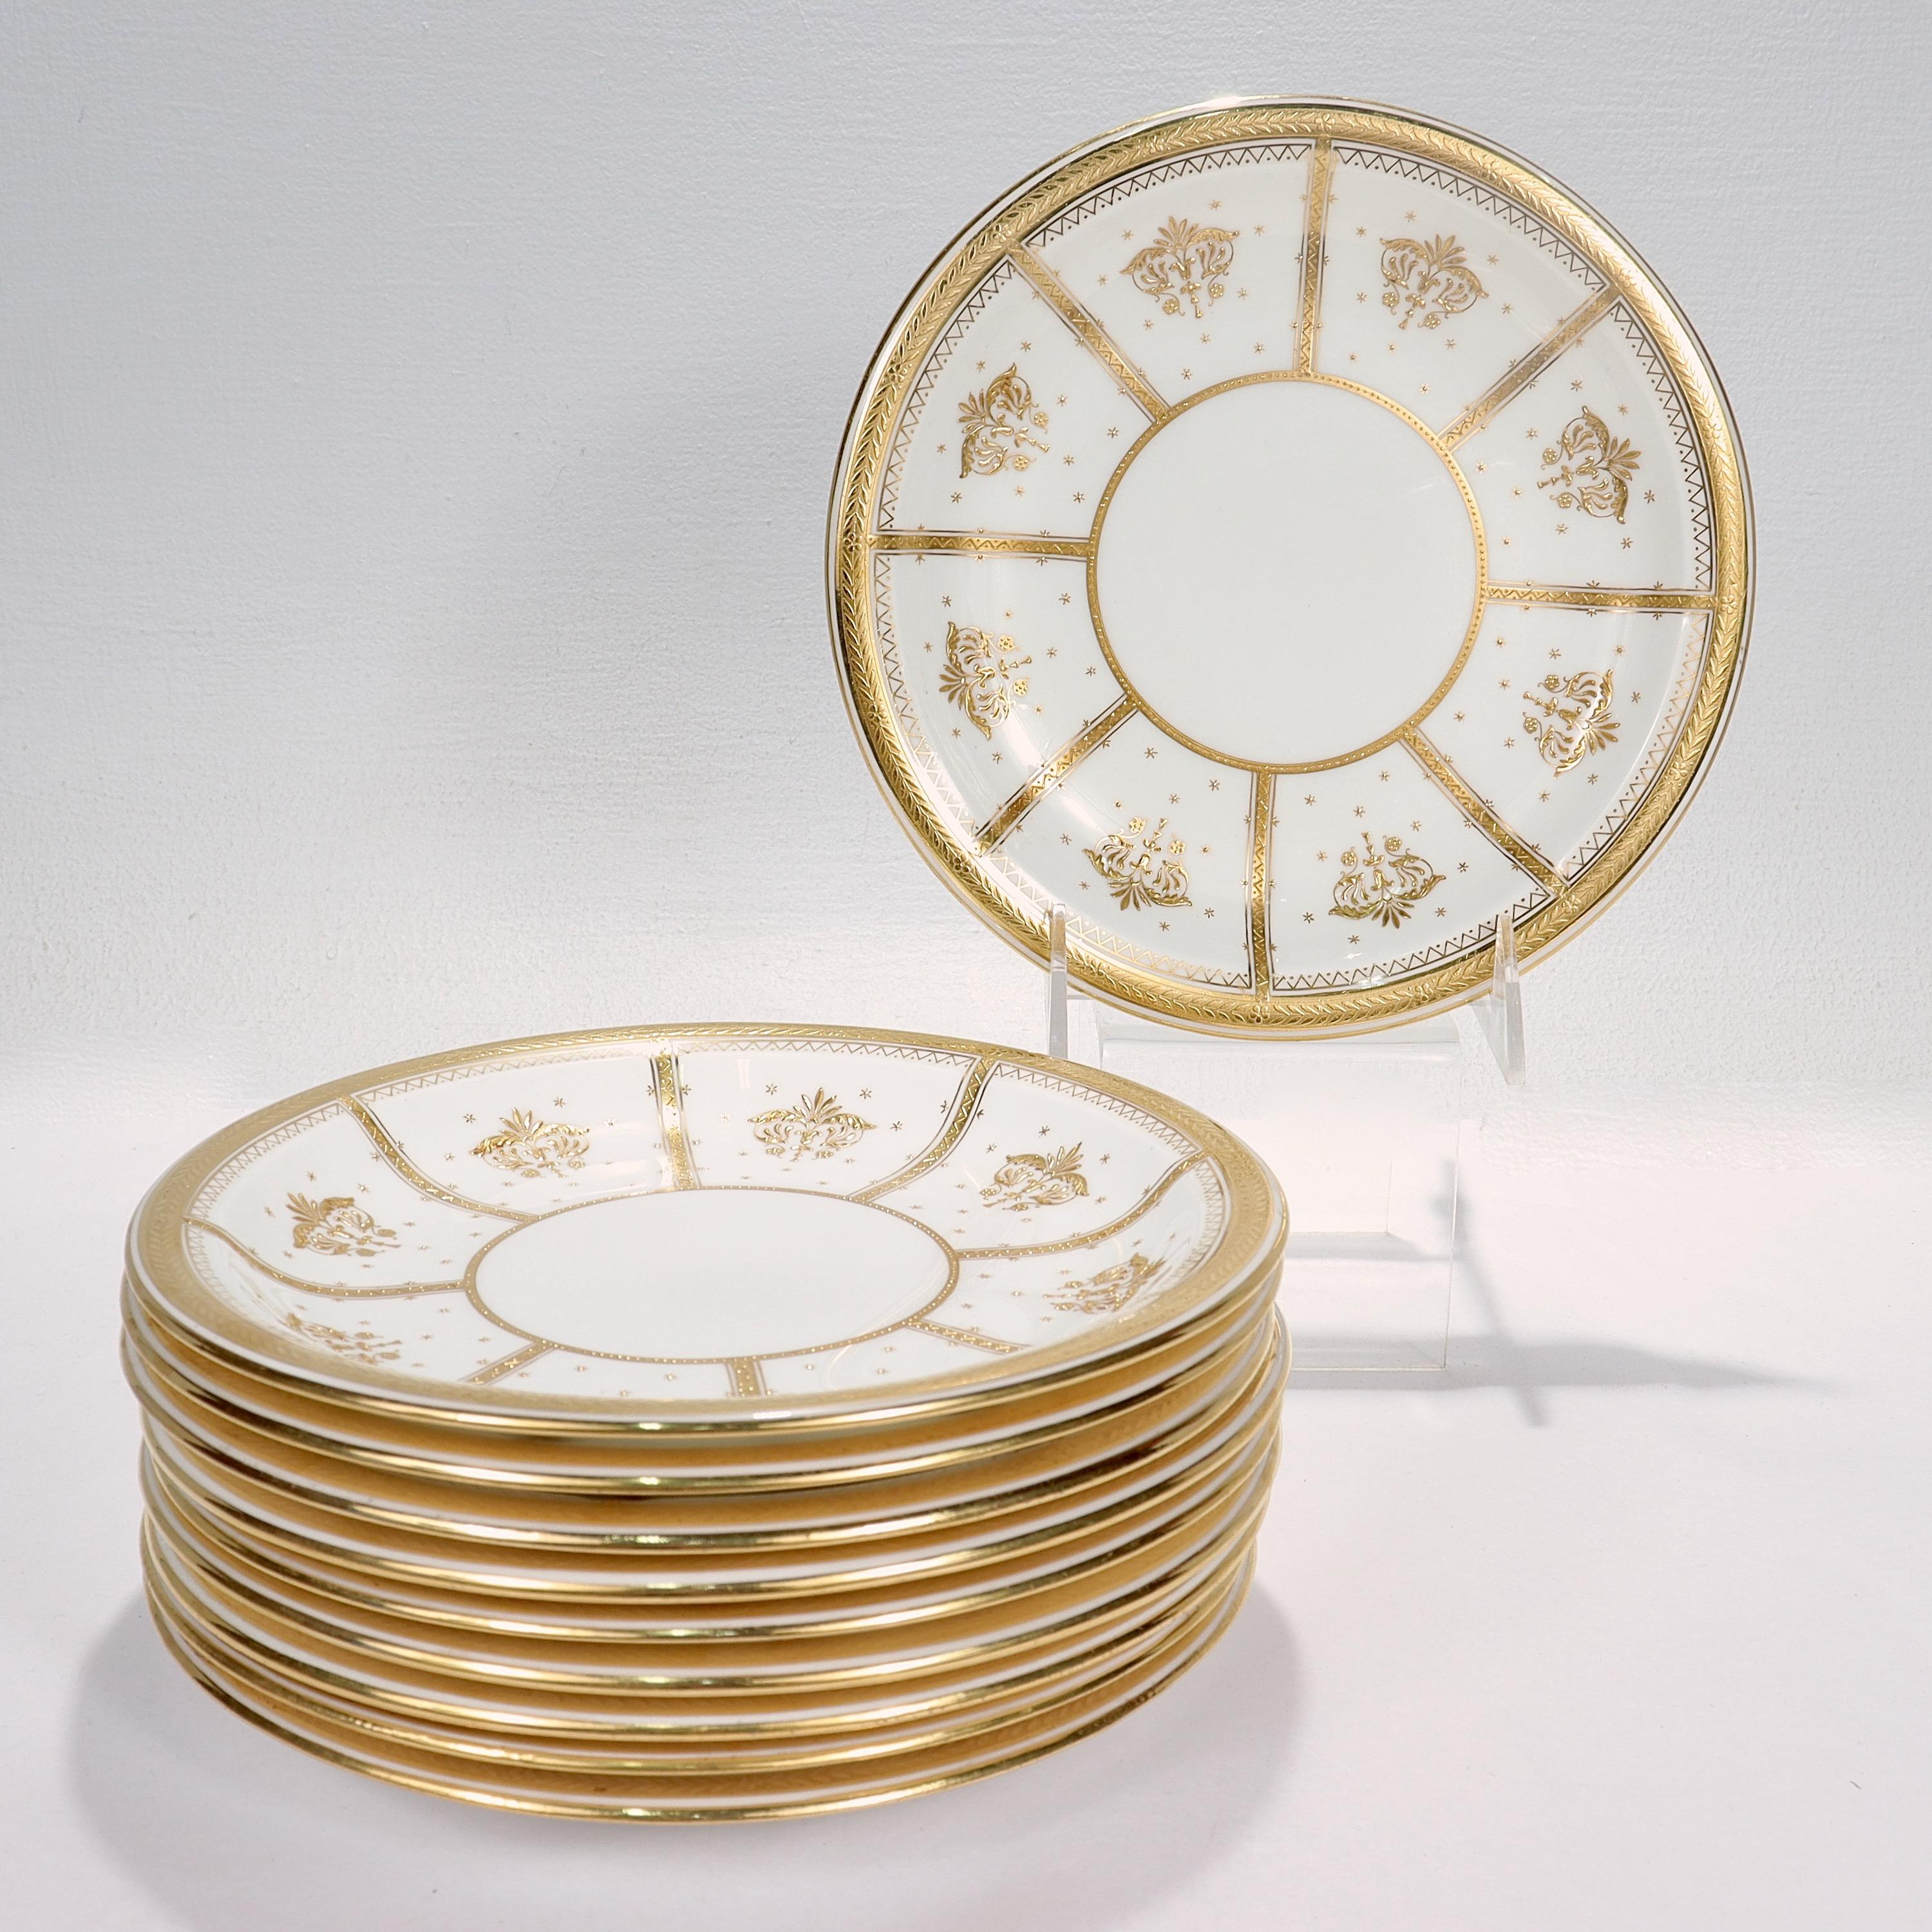 A set of 10 richly gilt porcelain luncheon or dessert plates.

By Mintons.

In an Aesthetic Movement numbered pattern with raised gold and gold jeweling throughout.

Each marked to the base with a puce maker's mark that reads 58013 / E / Rd. No.